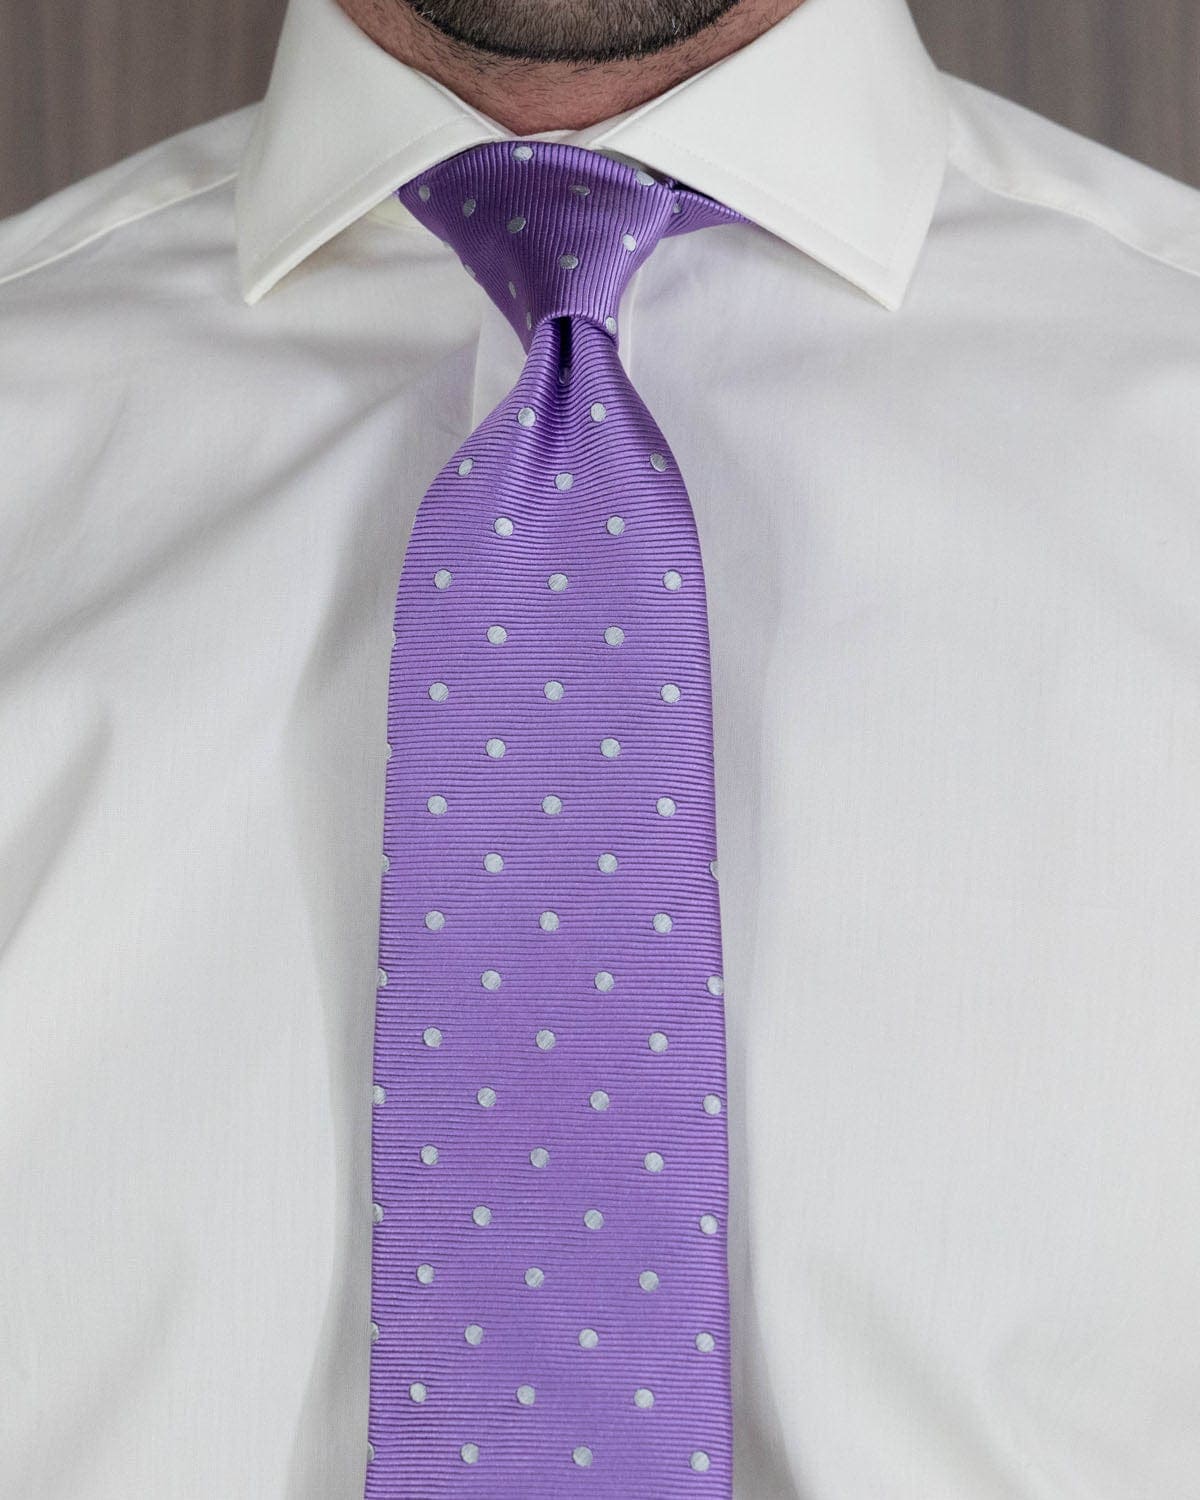 Lilac Twill with White Spots Woven Silk Tie